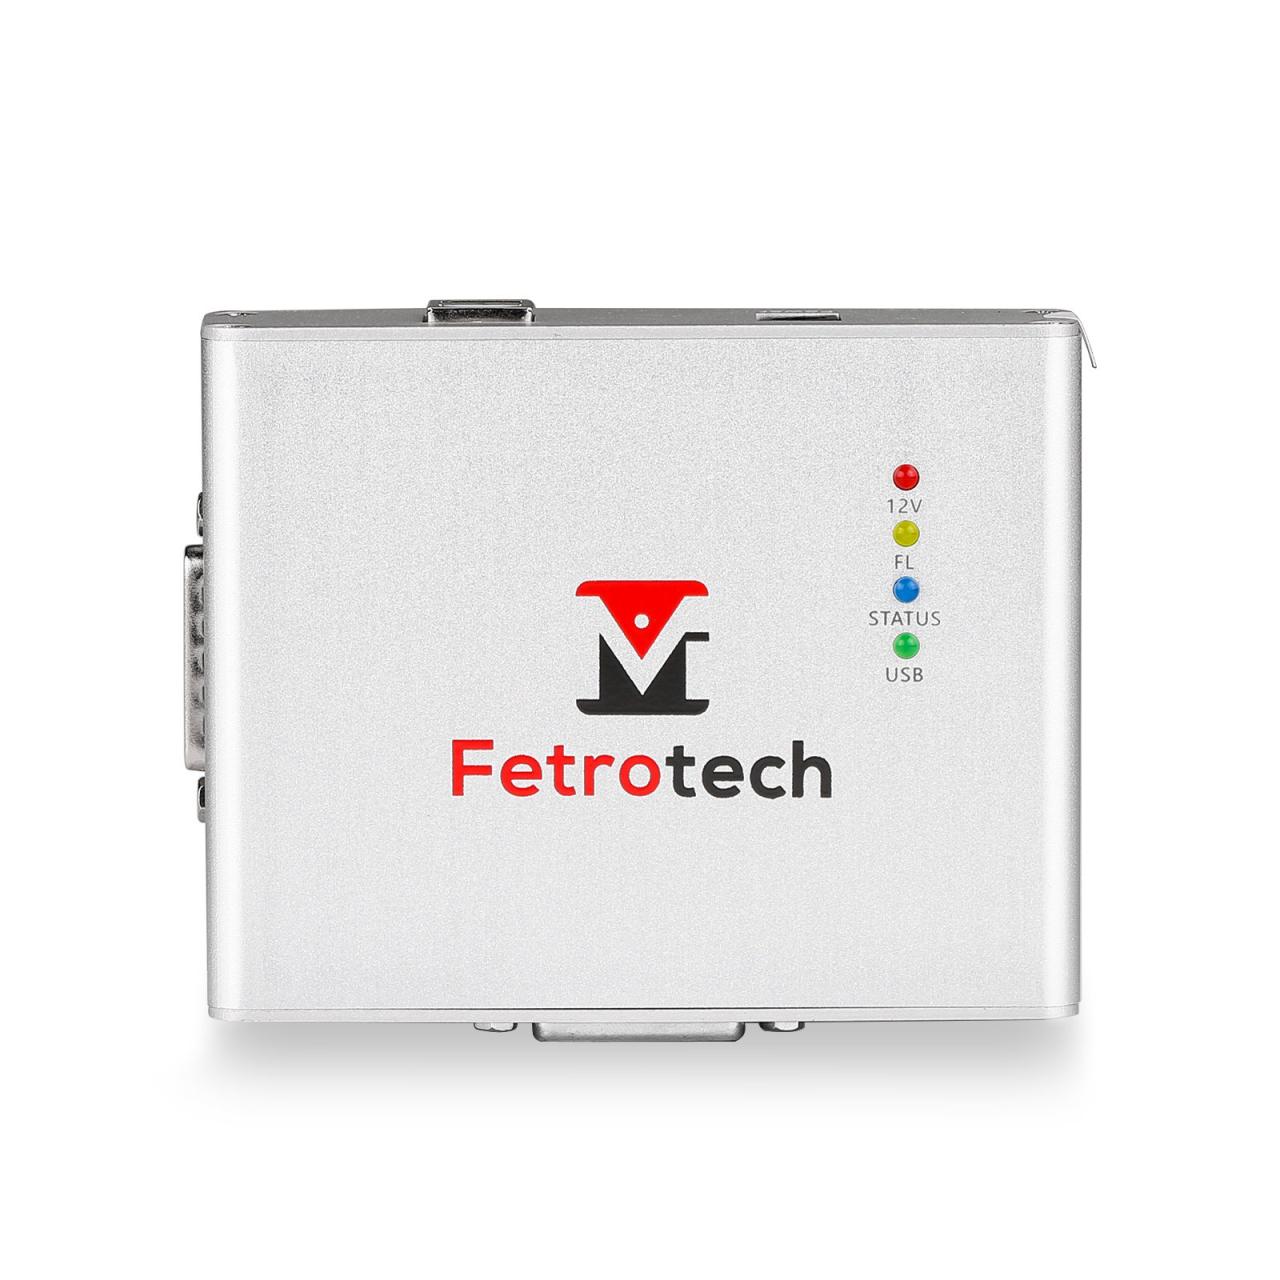 How to choose PCMTuner or Fetrotech Tool or dFlash?